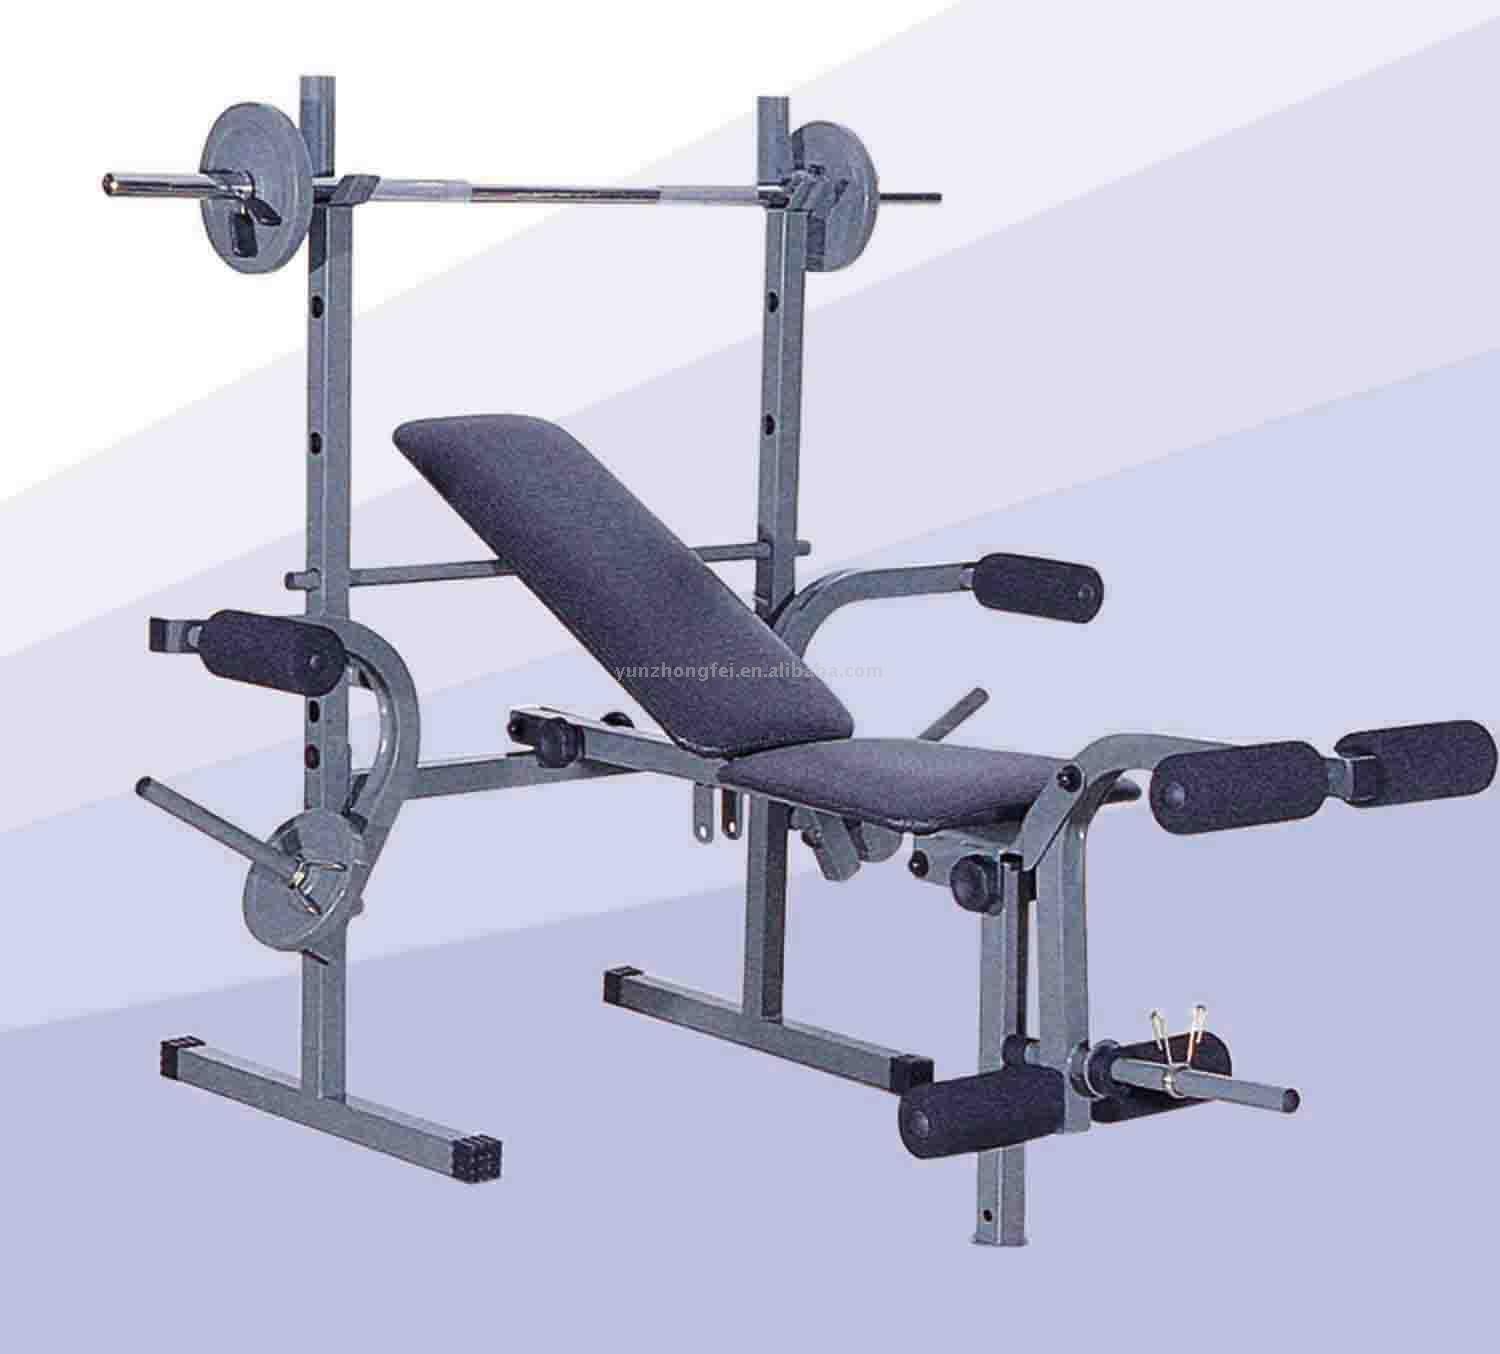 Best Craigslist workout bench for at home